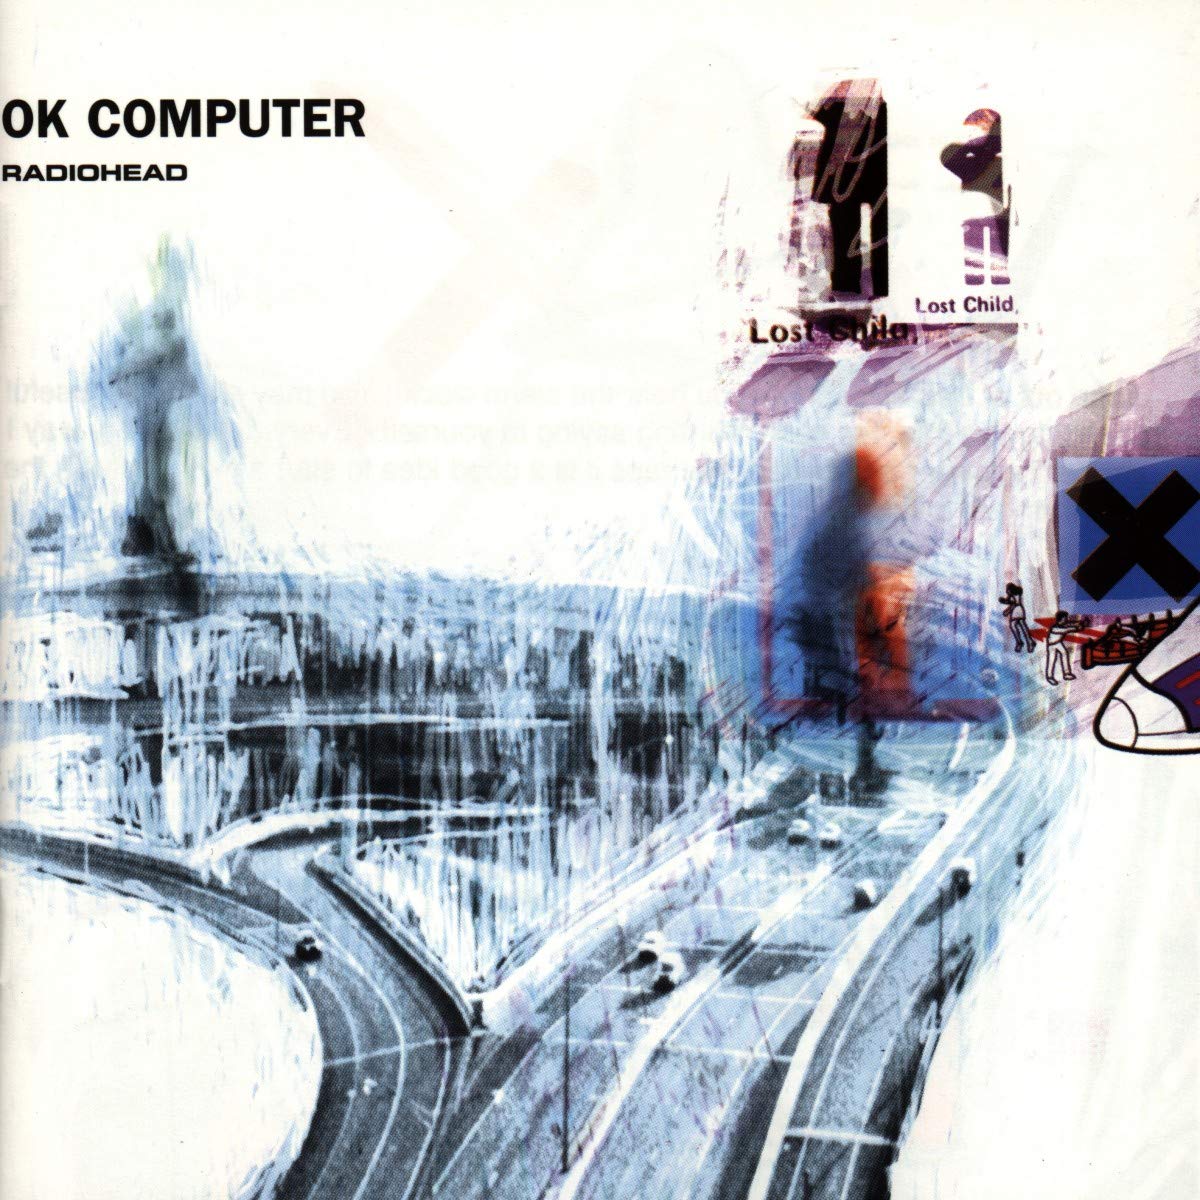 13. Paranoid AndroidRadiohead's multi phased opus is the mission statement of OK Computer. Every section is masterful and they all flow very well. This is the song I'd use to introduce people to Radiohead. I think it's song that's closest to represent their entire work